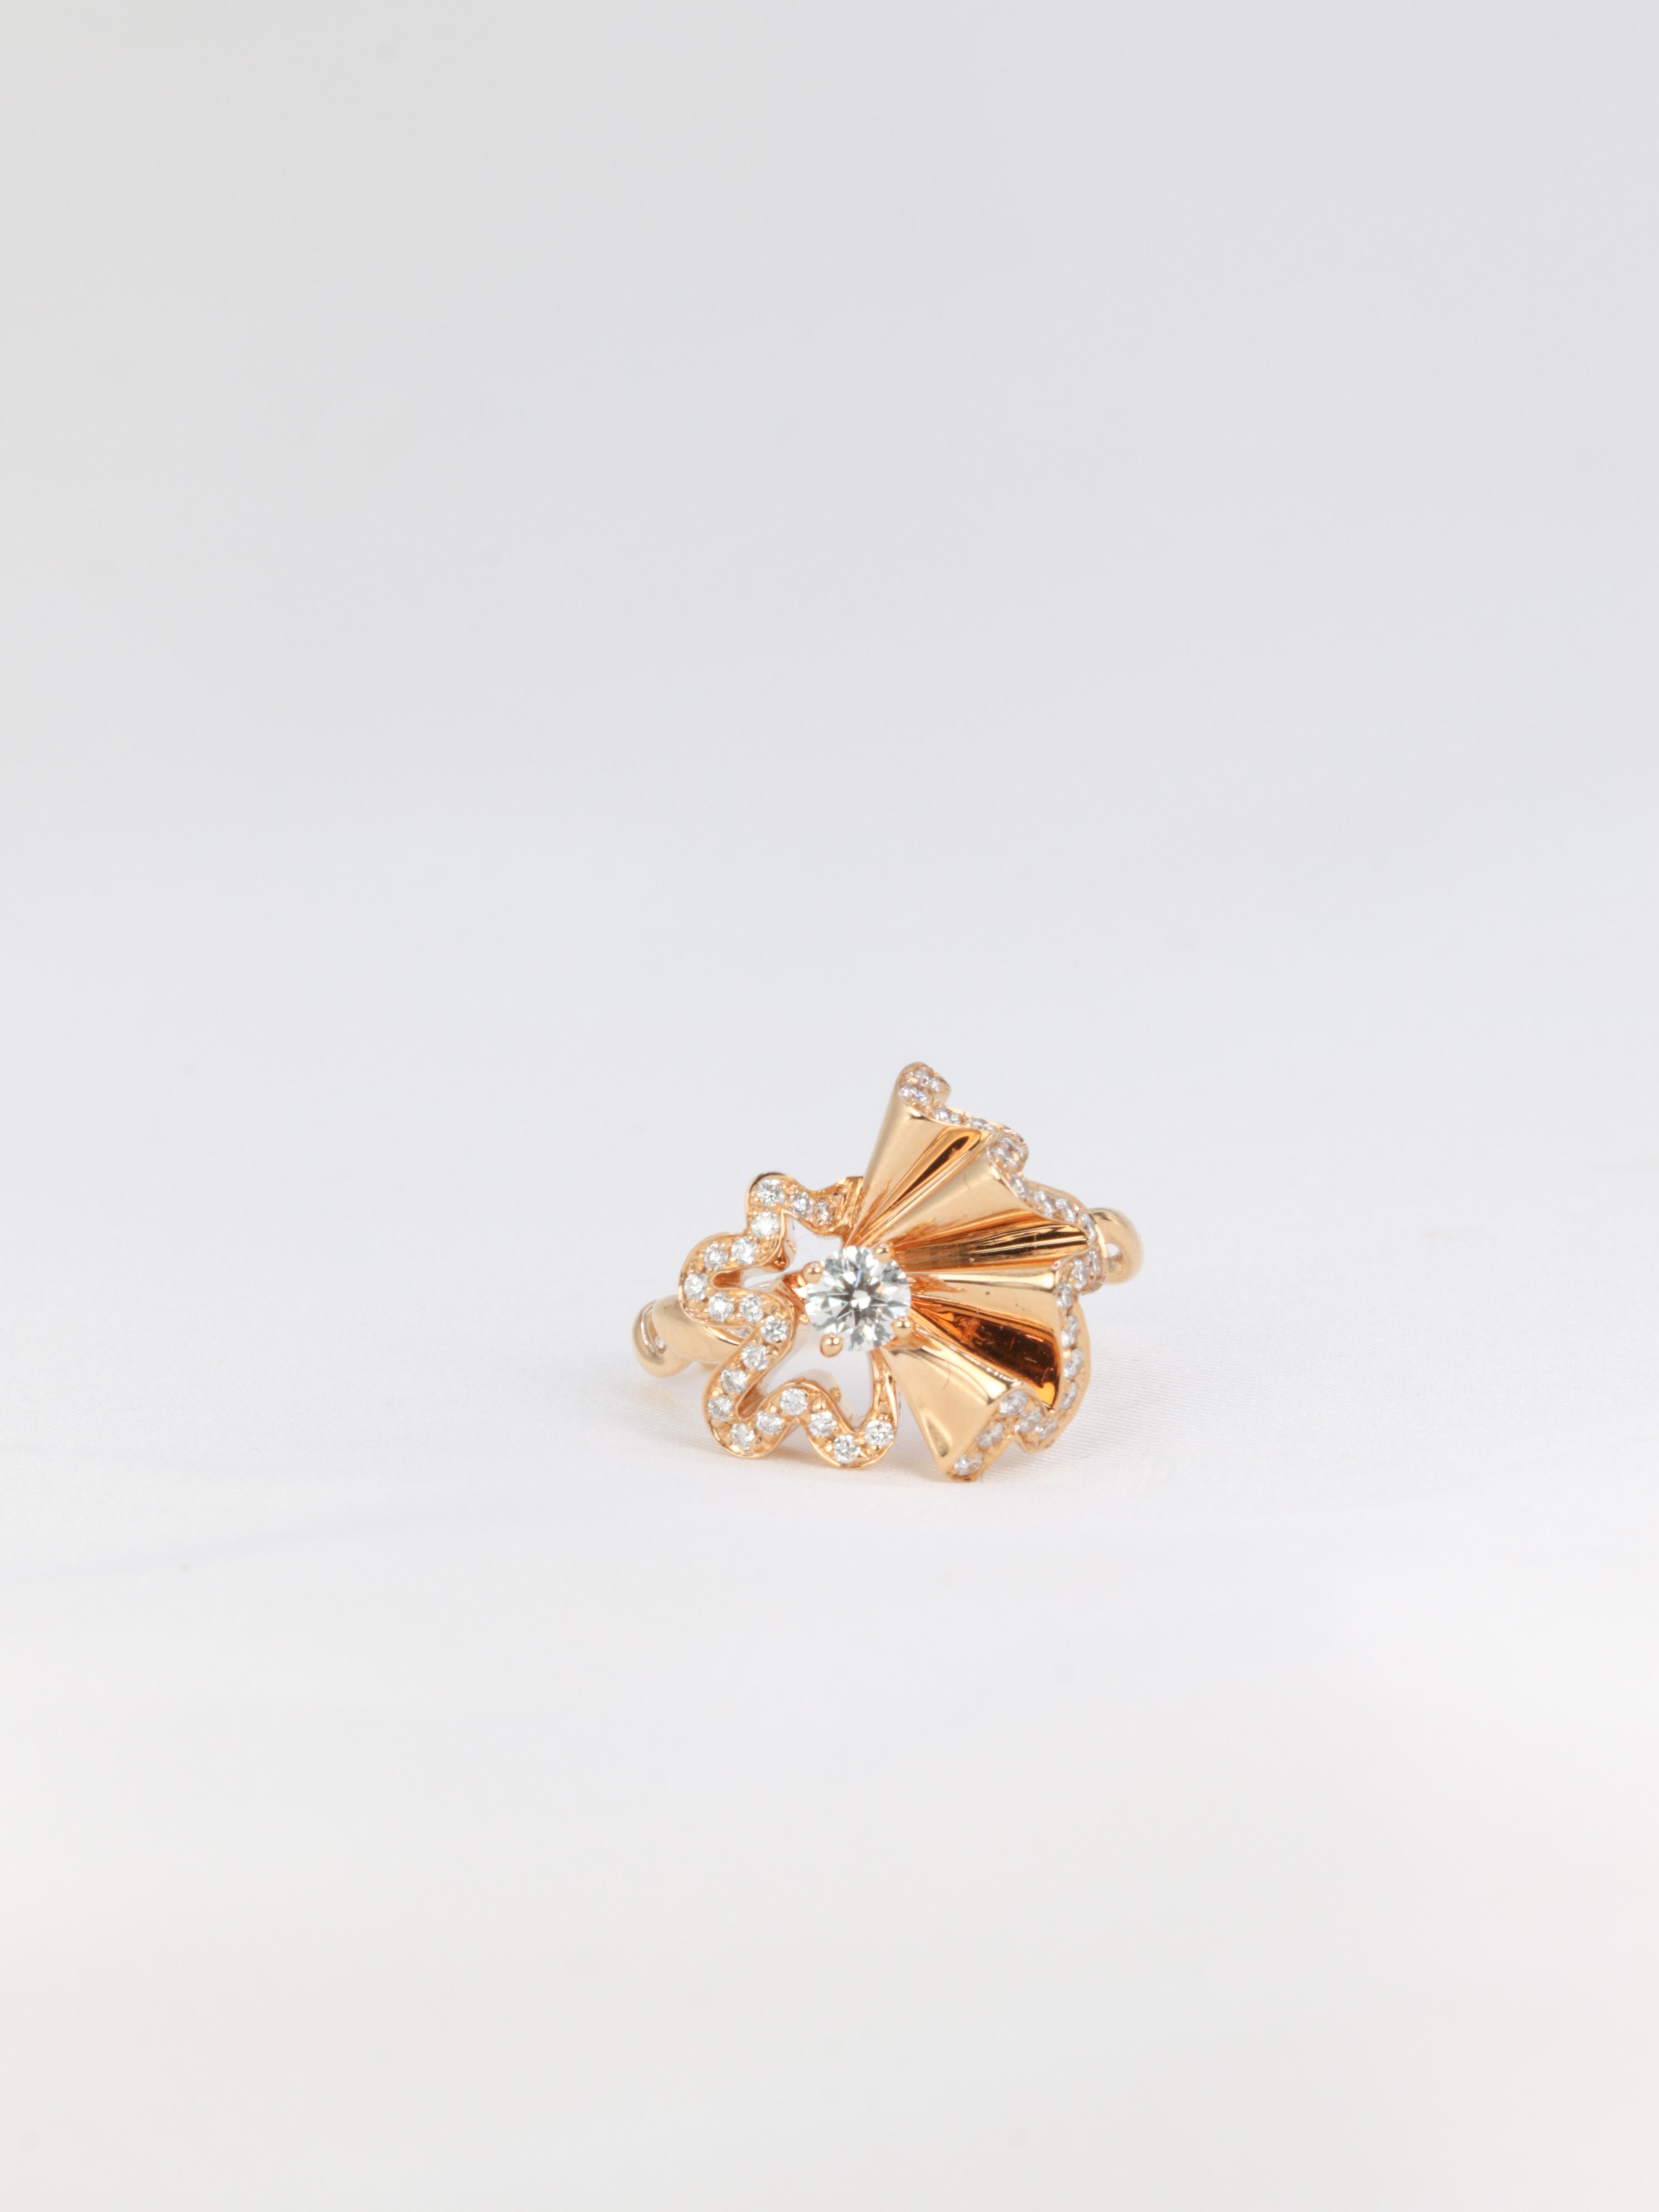 Archi Dior Ring - For Sale on 1stDibs